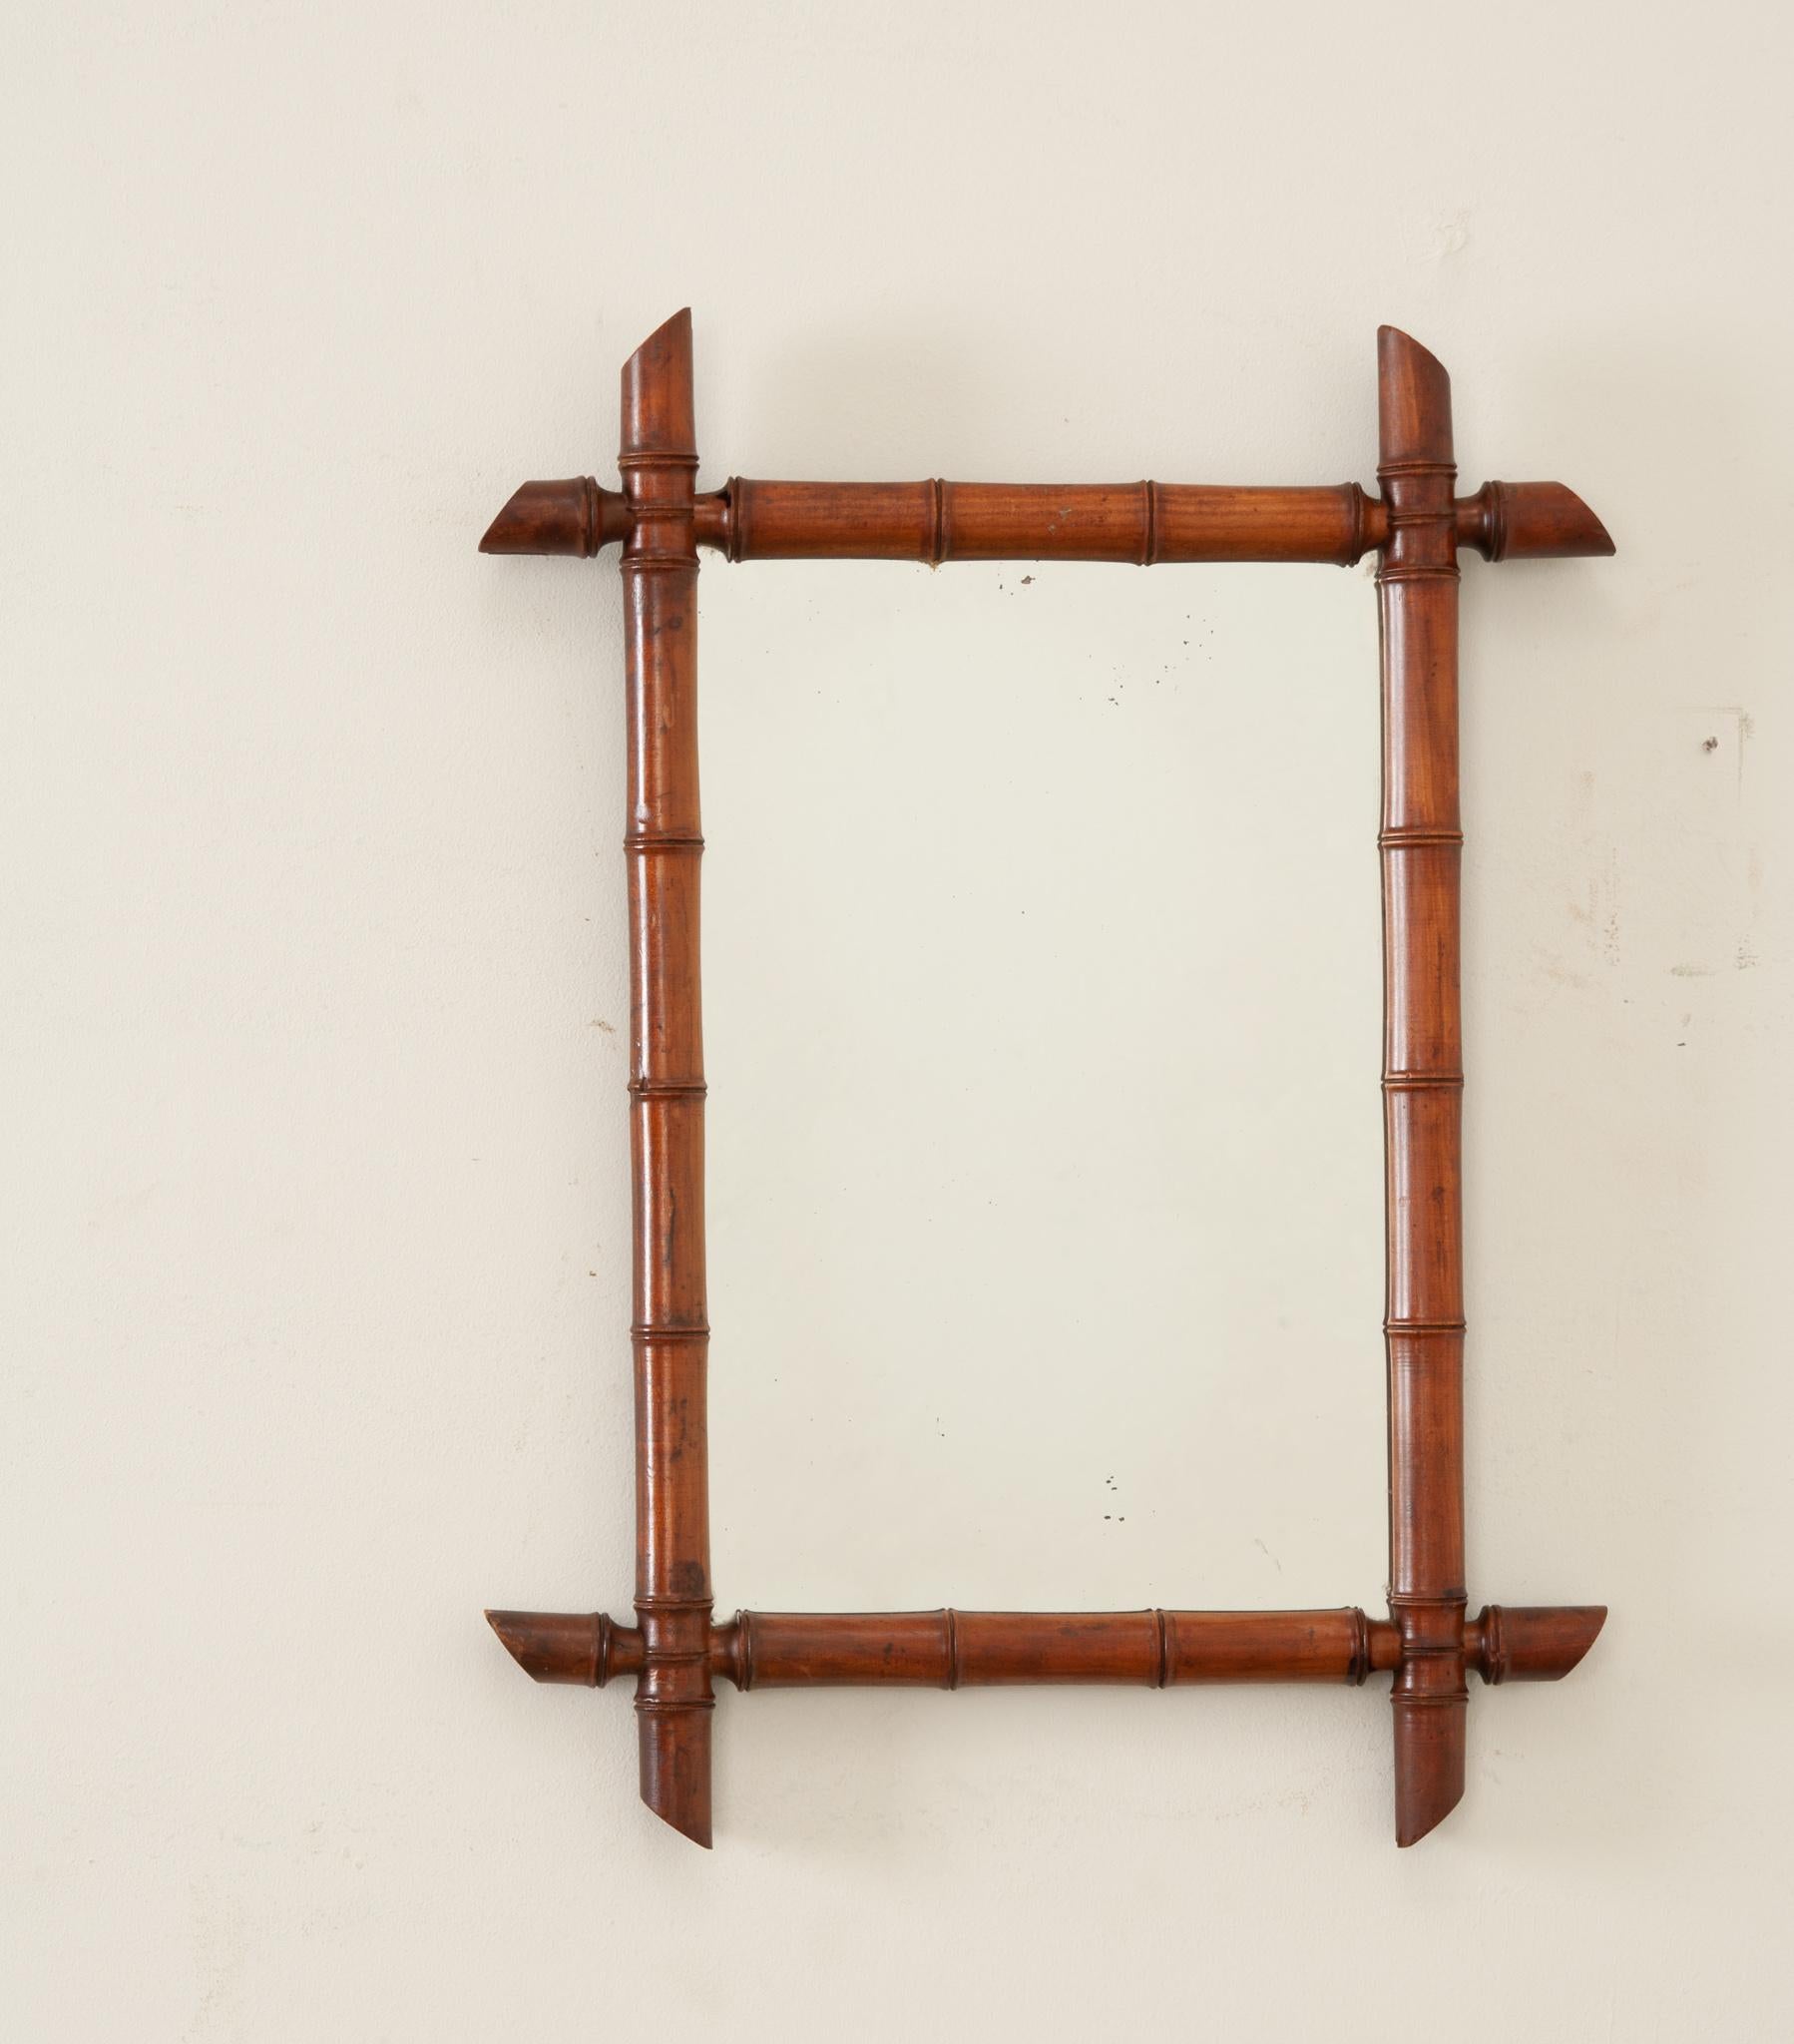 A delightful turned wood, faux bamboo mirror from early 20th Century France. The mirror’s wood frame has been artfully turned to a stylized bamboo motif. The mirrored glass is original to the antique with some foxing present. While the mirror is